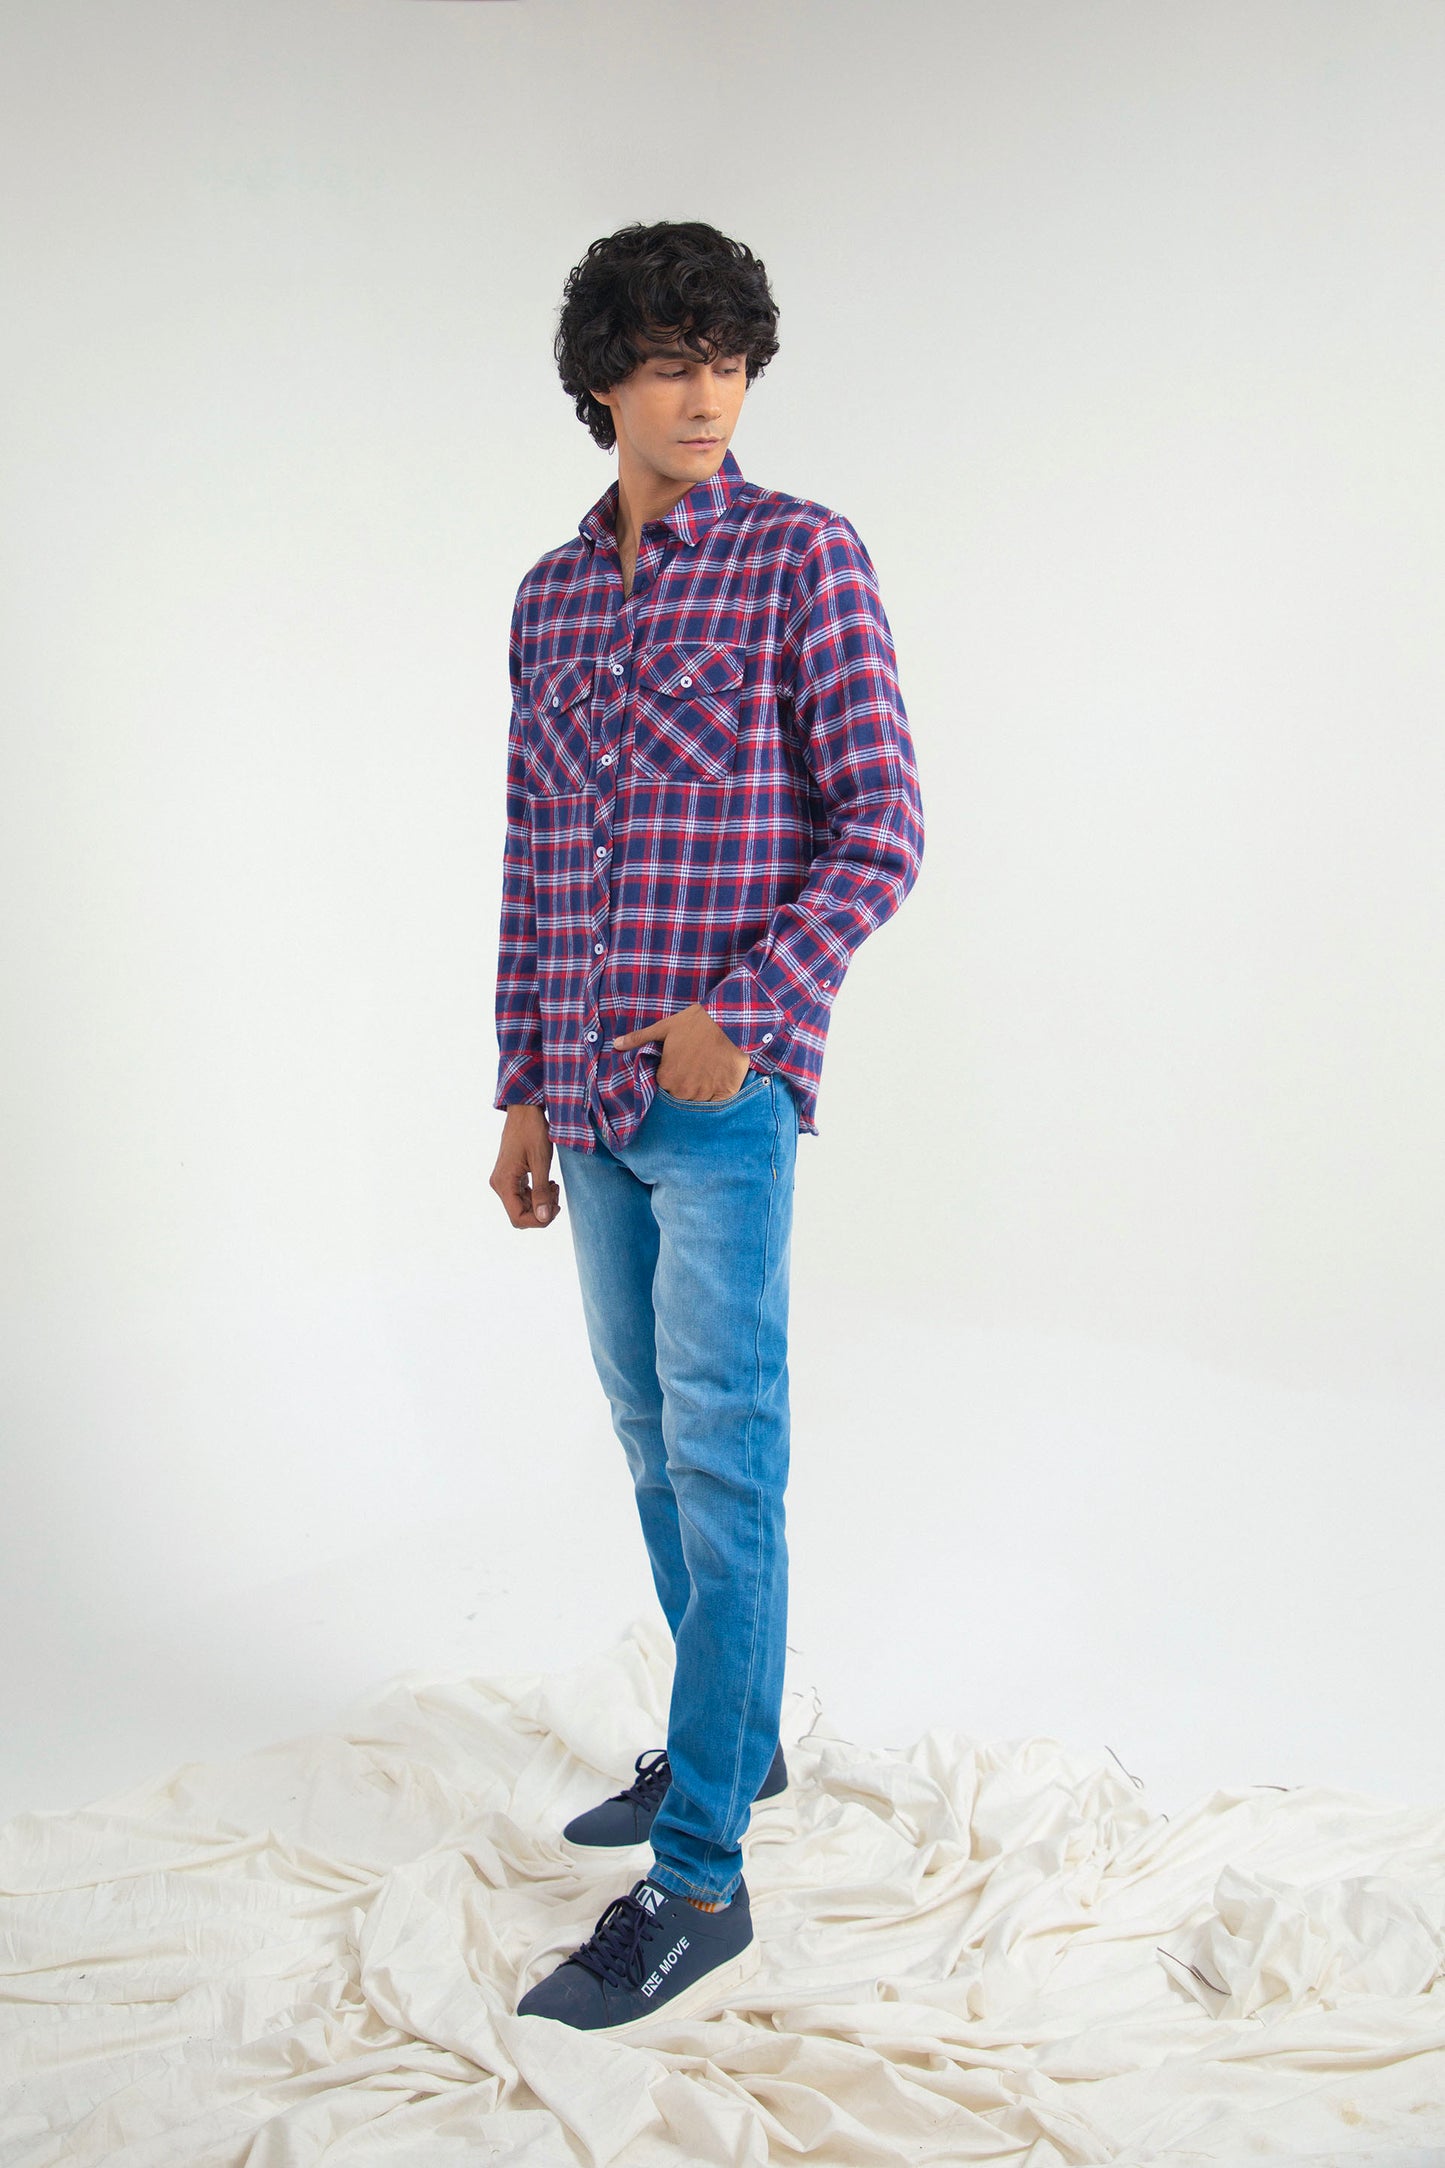 Flannel Shirt Red/Blue